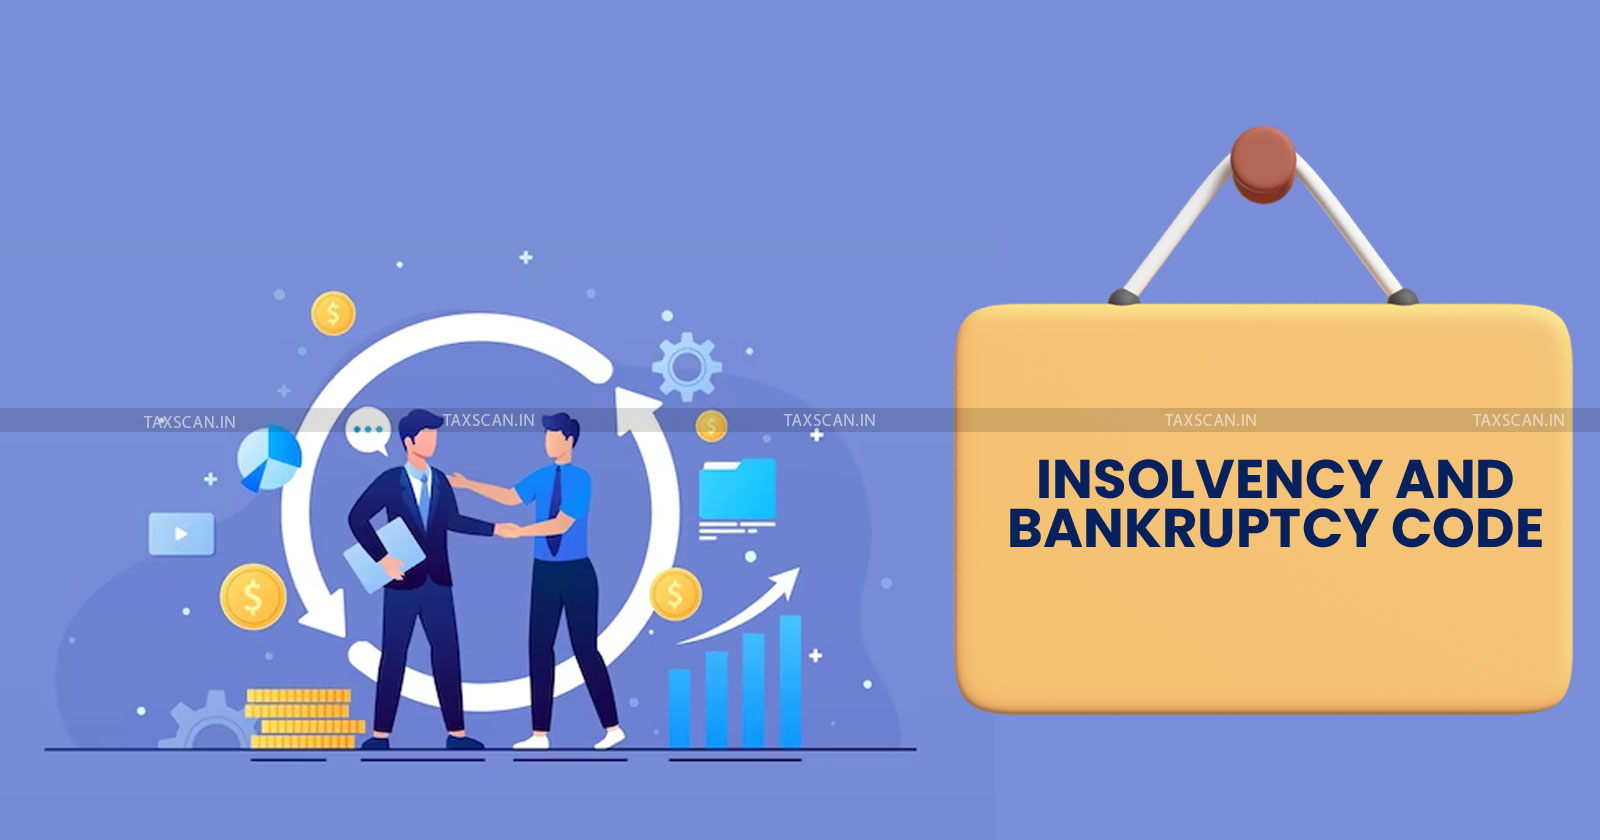 Joint Venture Investment - Corporate Debtor - NCLT - Financial Creditor Investment - NCLT Guwahati - Non Financial Debt under IBC - Insolvency and Bankruptcy Code - TAXSCAN